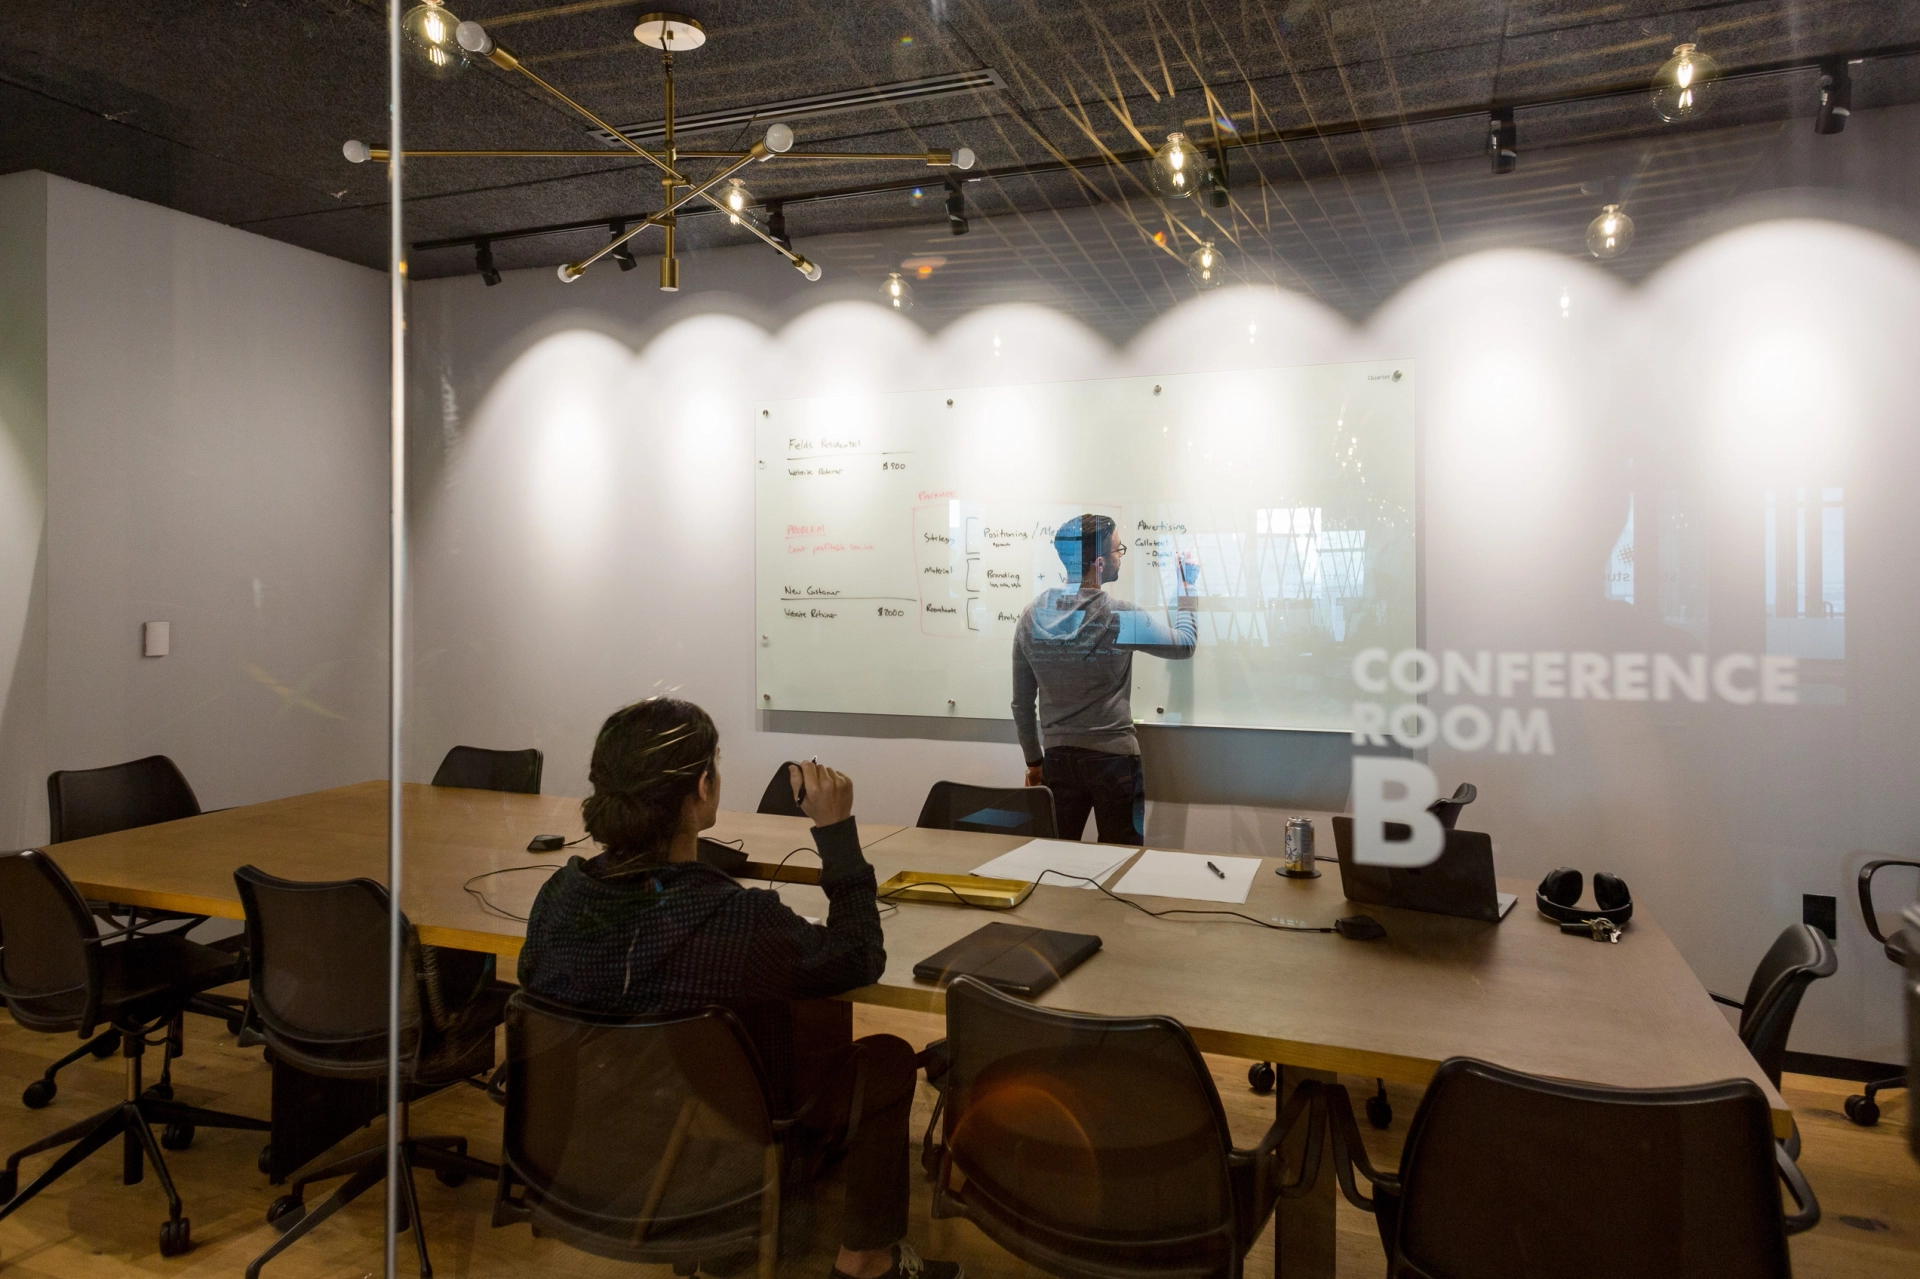 An office conference room featuring a whiteboard for collaborative workspace.